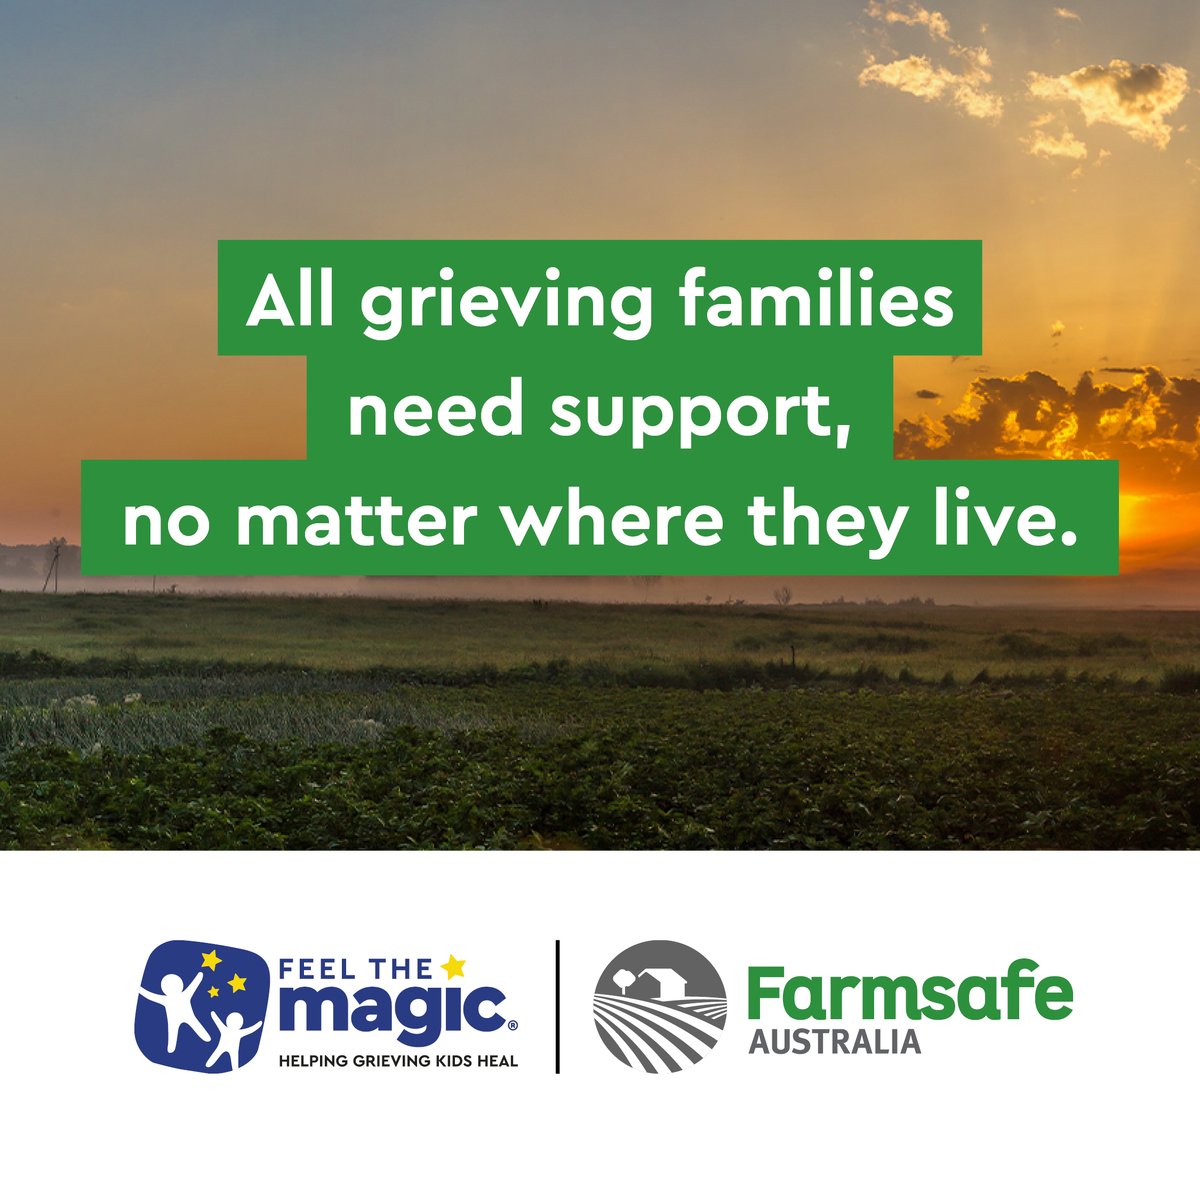 We are proud to announce a partnership with @FeelTheMagicAU, an Australian charity providing early intervention grief education programs for kids who are experiencing pain & isolation due to the death of a parent, guardian, or sibling. For more info buff.ly/3x1PsHV.